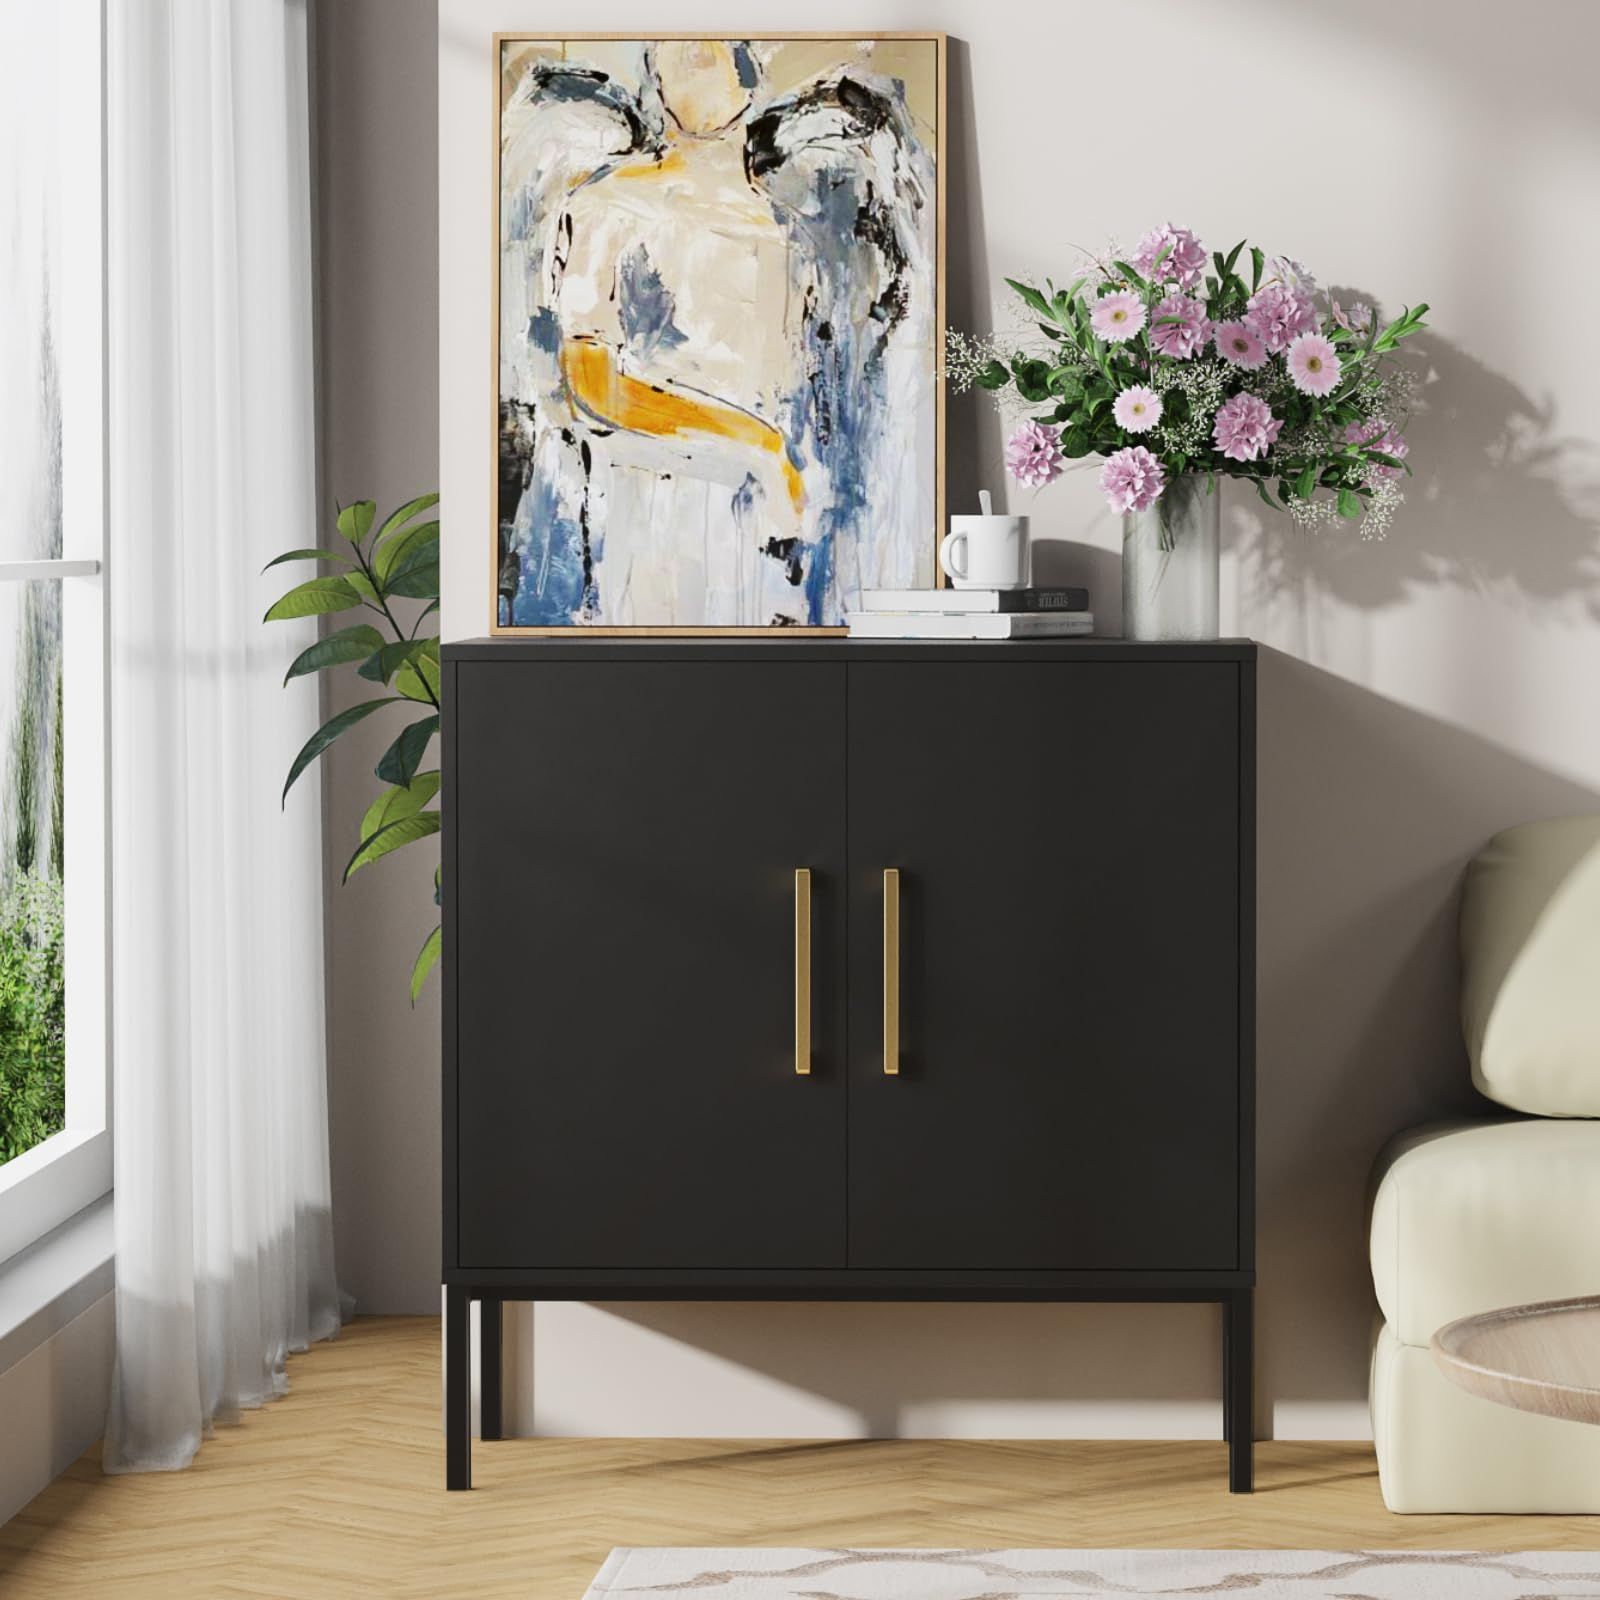 Sideboards Accent Cabinet Regarding Widely Used Amazon: Resom Modern Storage Cabinet With Double Doors, White Sideboard  With Adjustable Shelves, Accent Cabinet For Living Room, Bedroom, Home  Office And Hallway (black) : Home & Kitchen (View 5 of 10)